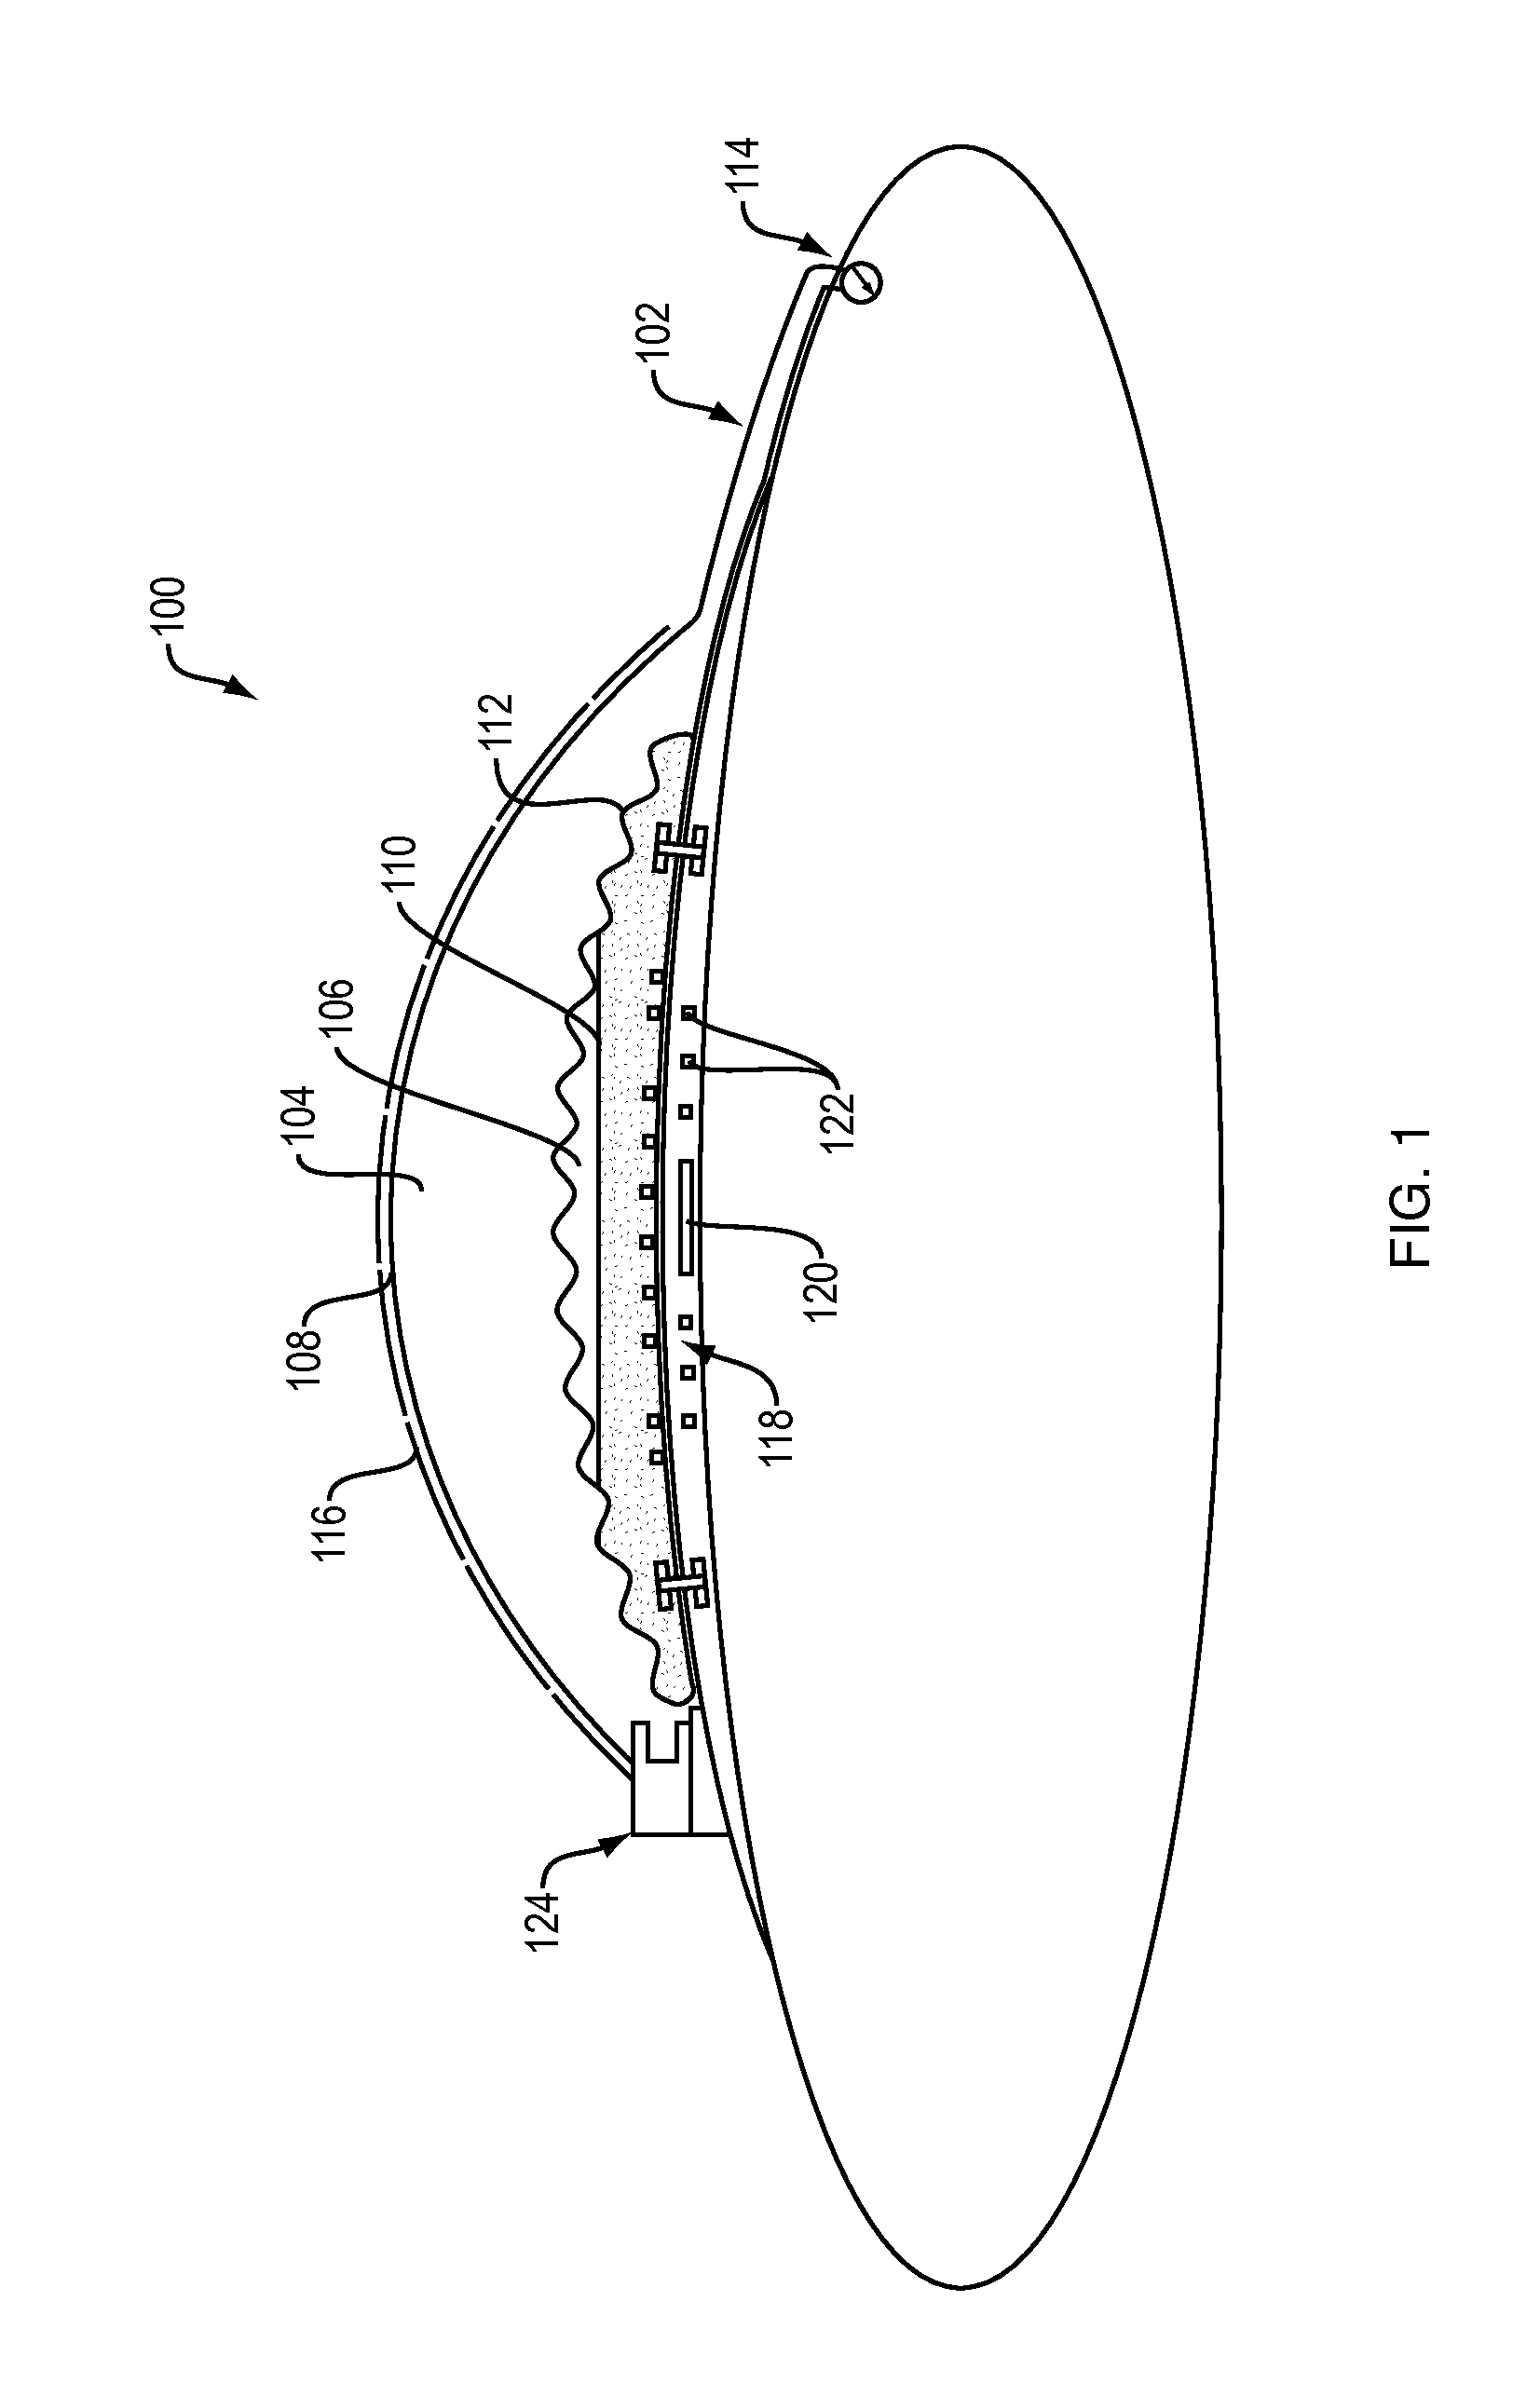 Implantable drug pumps and refill devices therefor